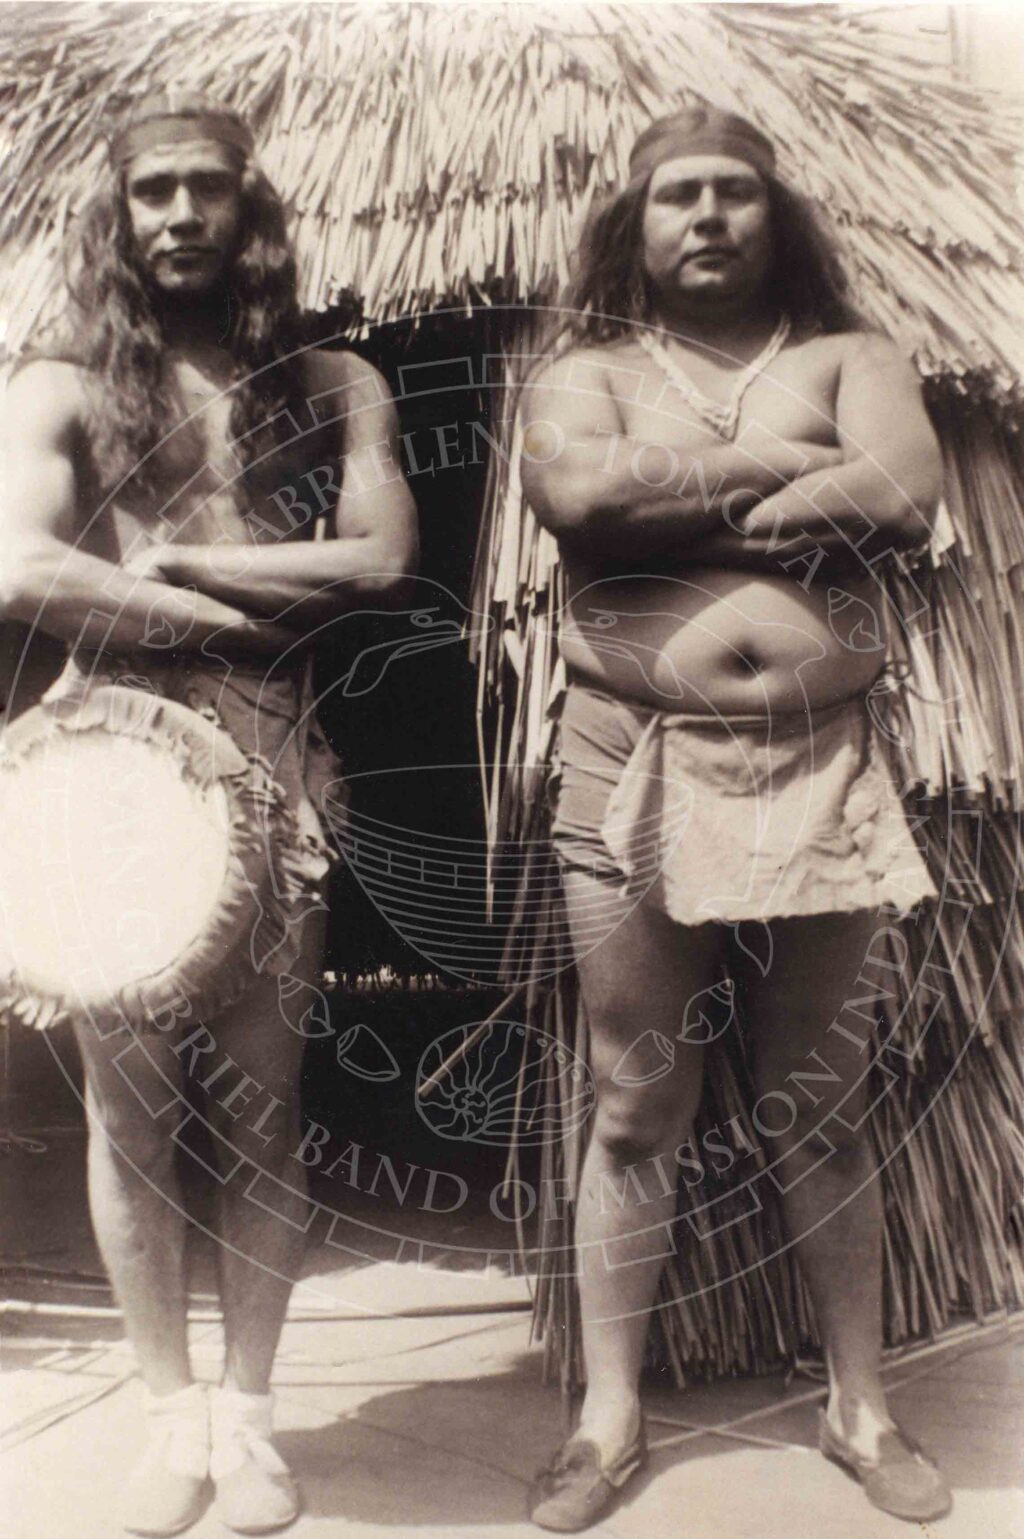 Sepia toned historical photograph of two long-haired men in traditional attire including headbands, aprons and necklaces stand with their arms crossed in front of a thatched house